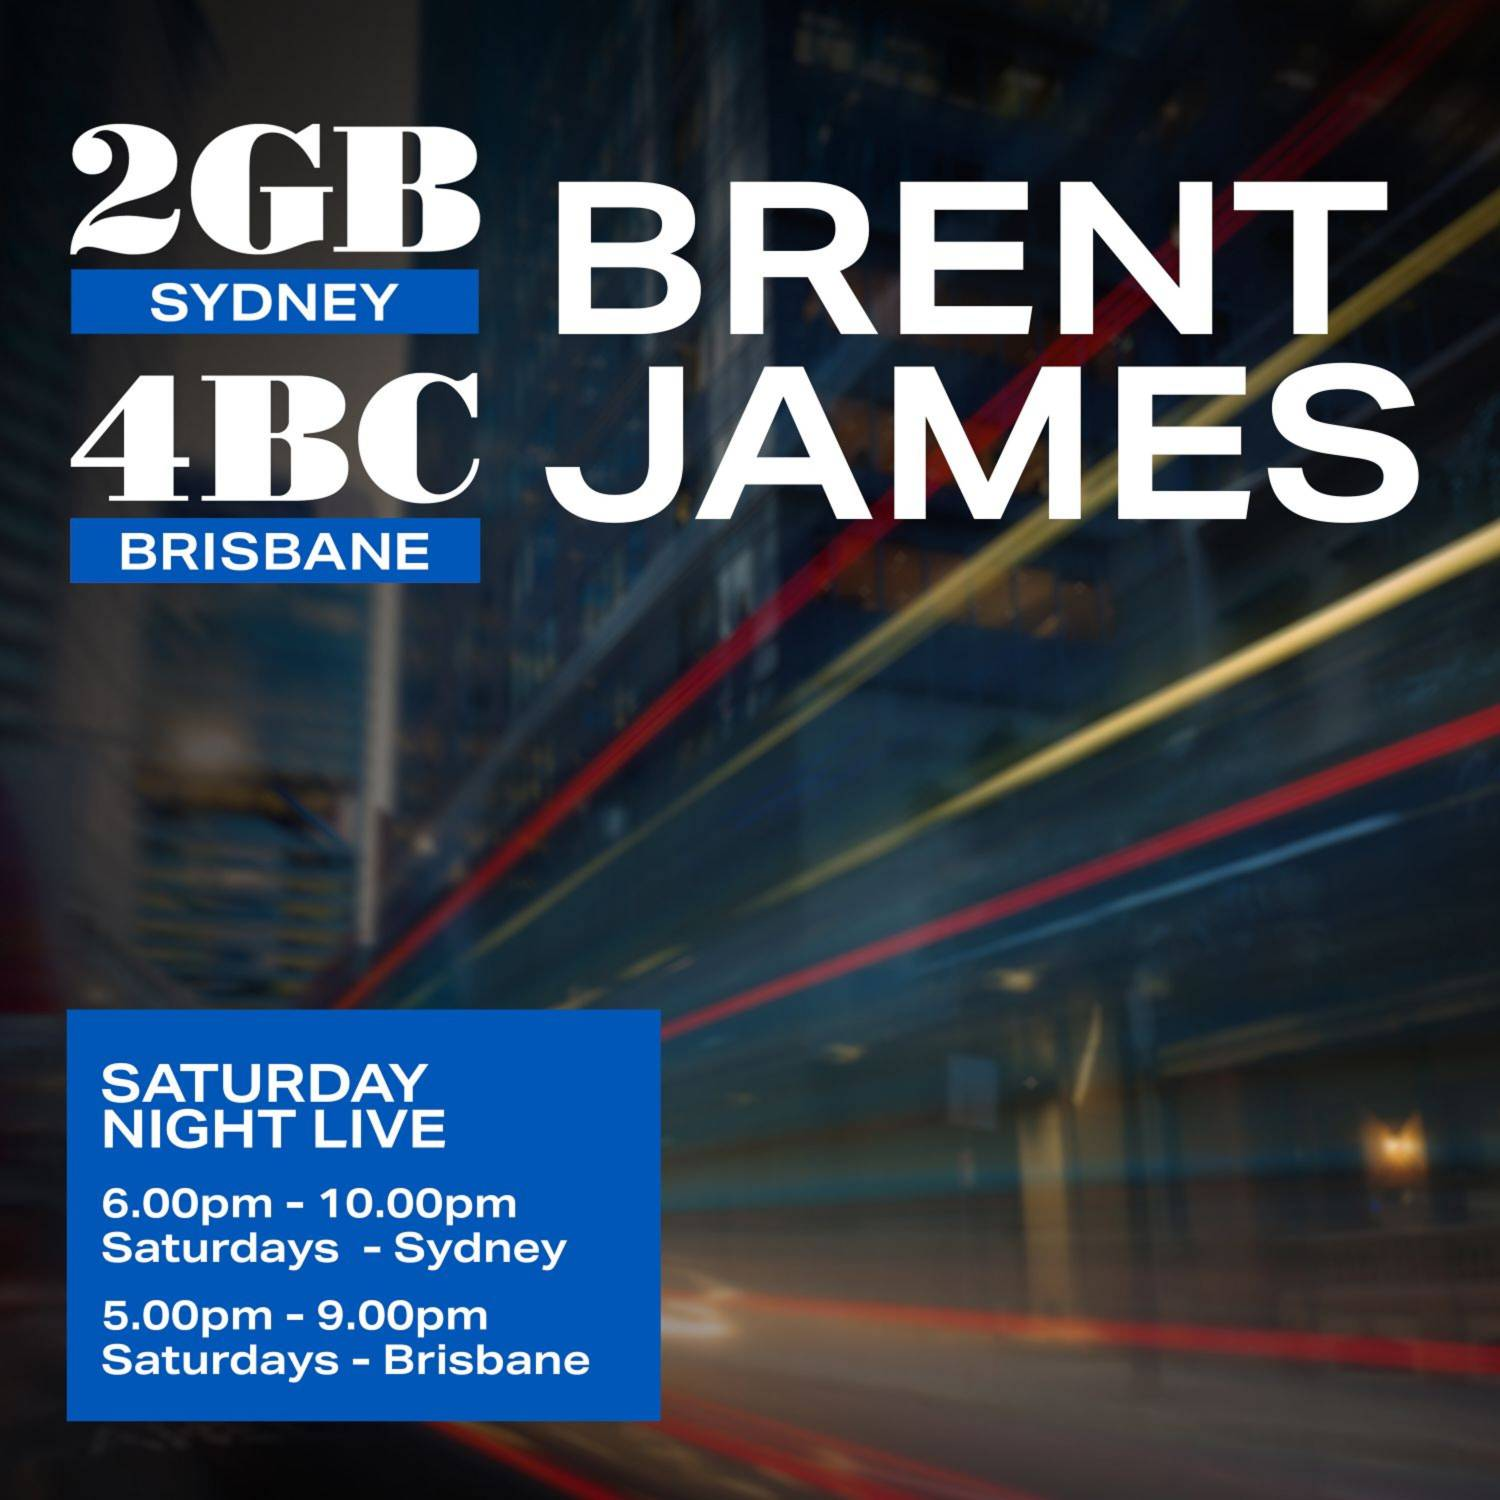 Saturday Night Live with Brent James